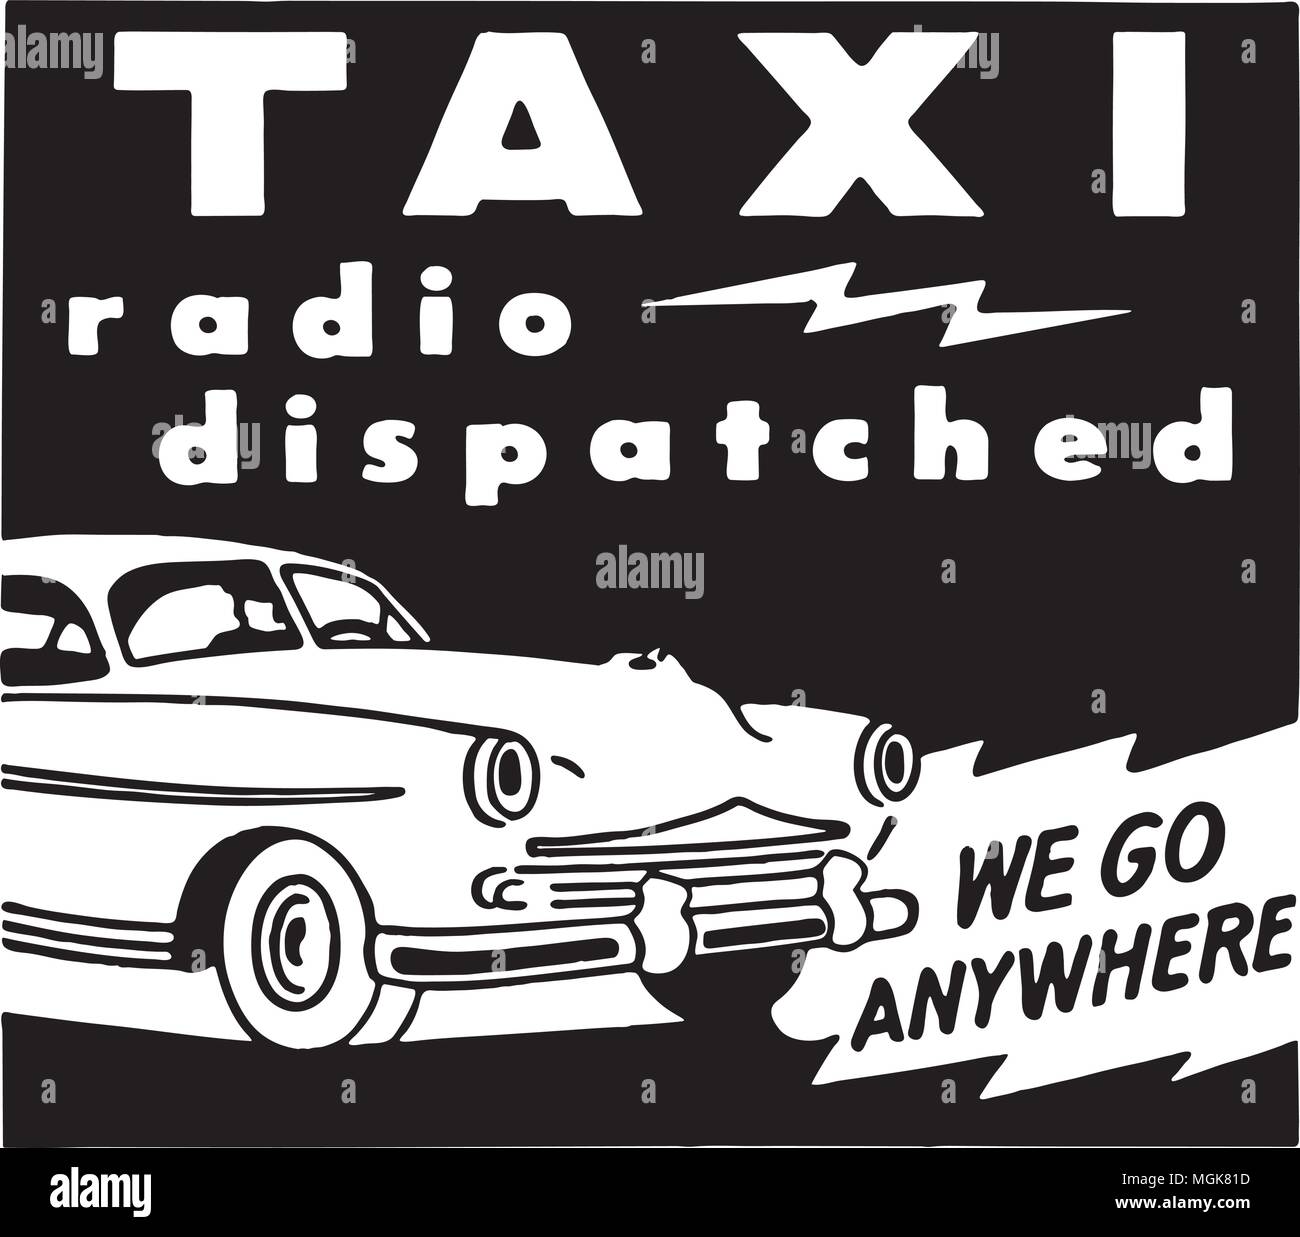 Taxi Radio Dispatched - Retro Ad Art Banner Stock Vector